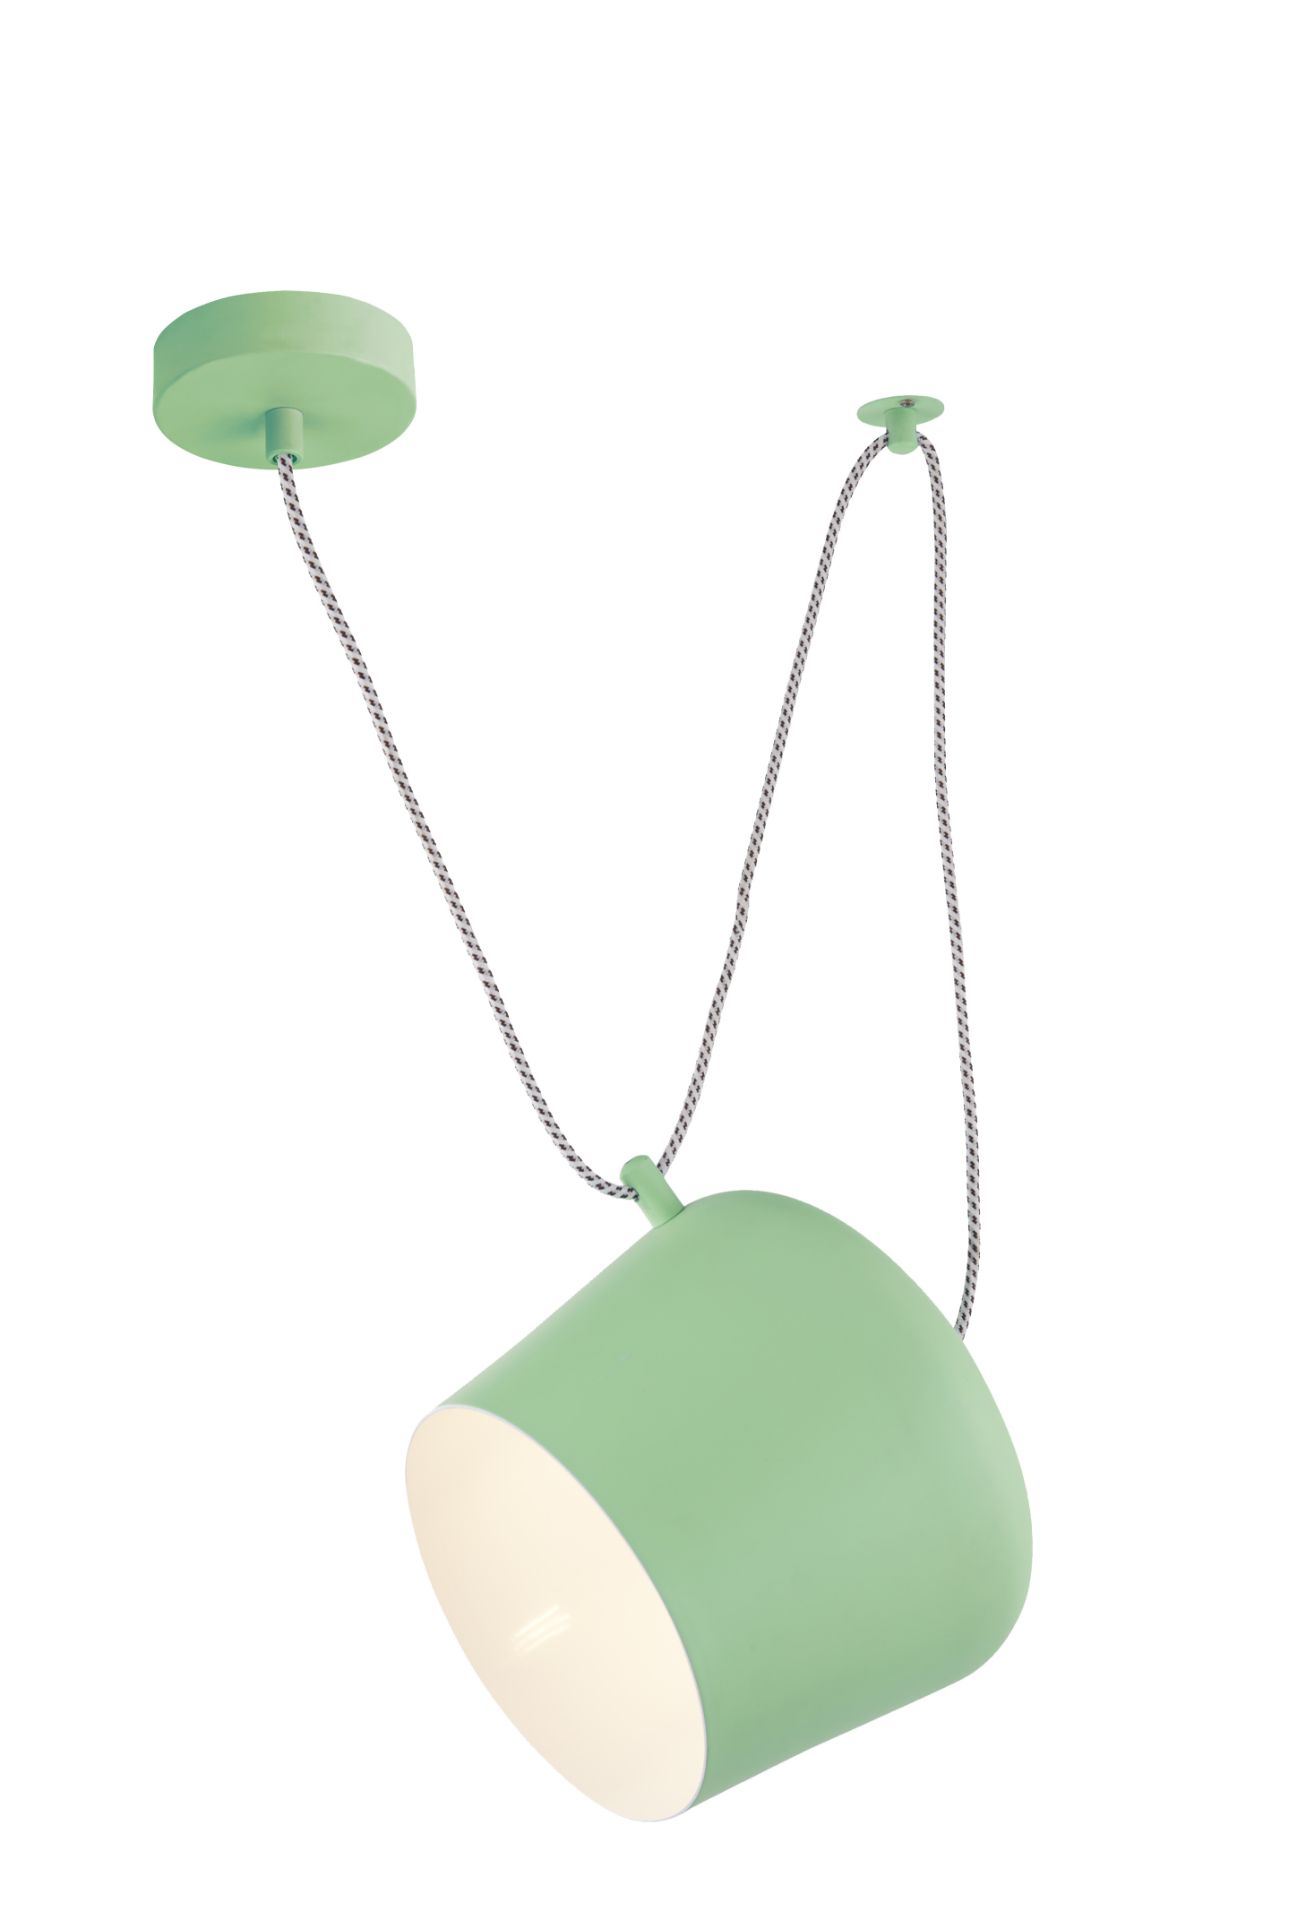 BRAND NEW APPLE GREEN METAL PENDANT HEIGHT 76CM RRP £48 - Apple green ceiling light with duel